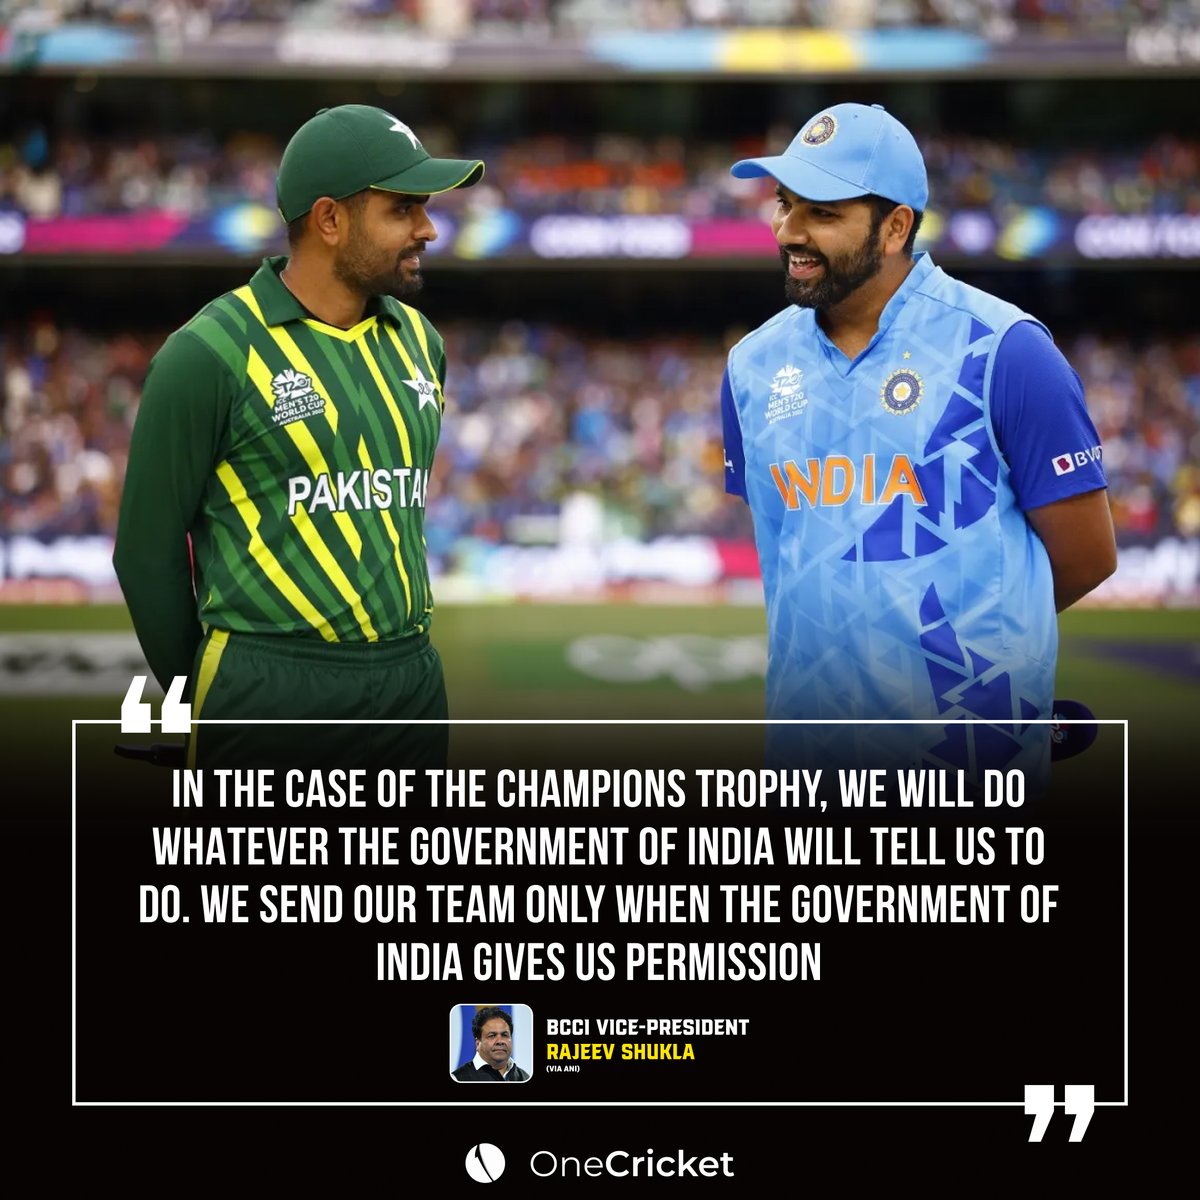 BCCI Vice President Rajiv Shukla gives an update on India's participation in the upcoming Champions Trophy 🗣️

#INDvsPAK #ChampionsTrophy #Cricket